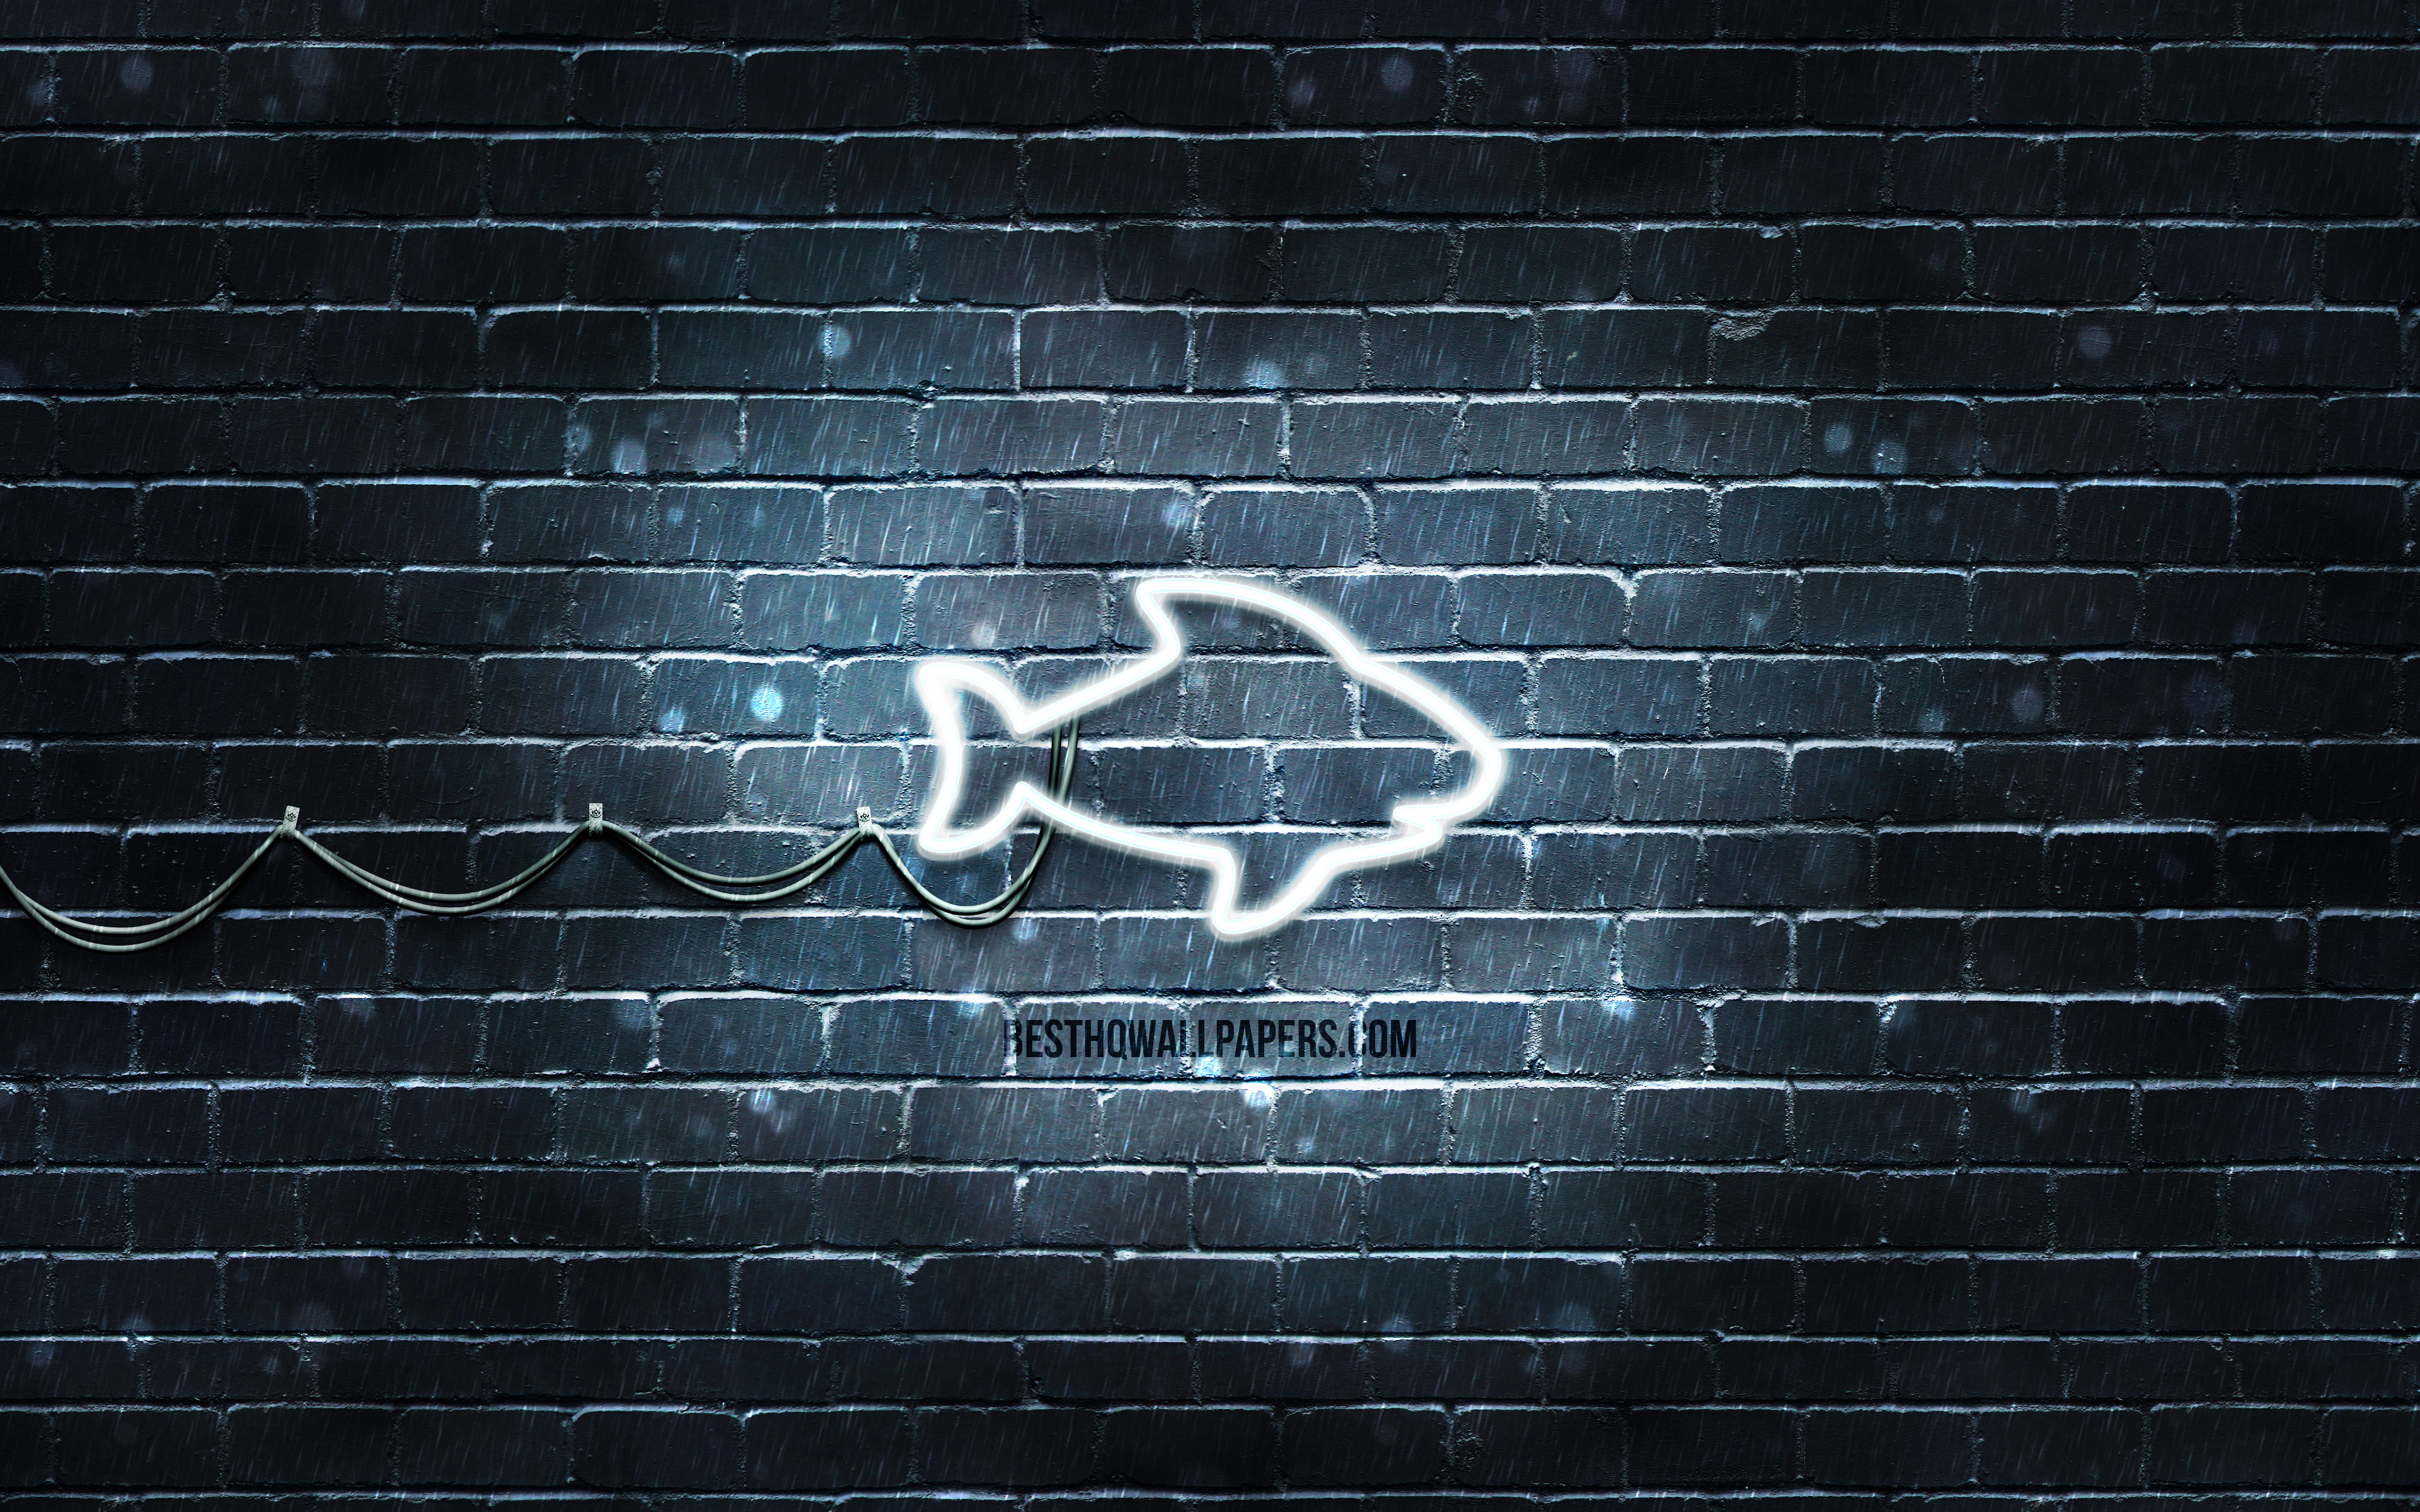 Download wallpaper White Shark neon icon, 4k, gray background, neon symbols, White Shark, creative, neon icons, White Shark sign, animals signs, White Shark icon, animals icons for desktop with resolution 3840x2400. High